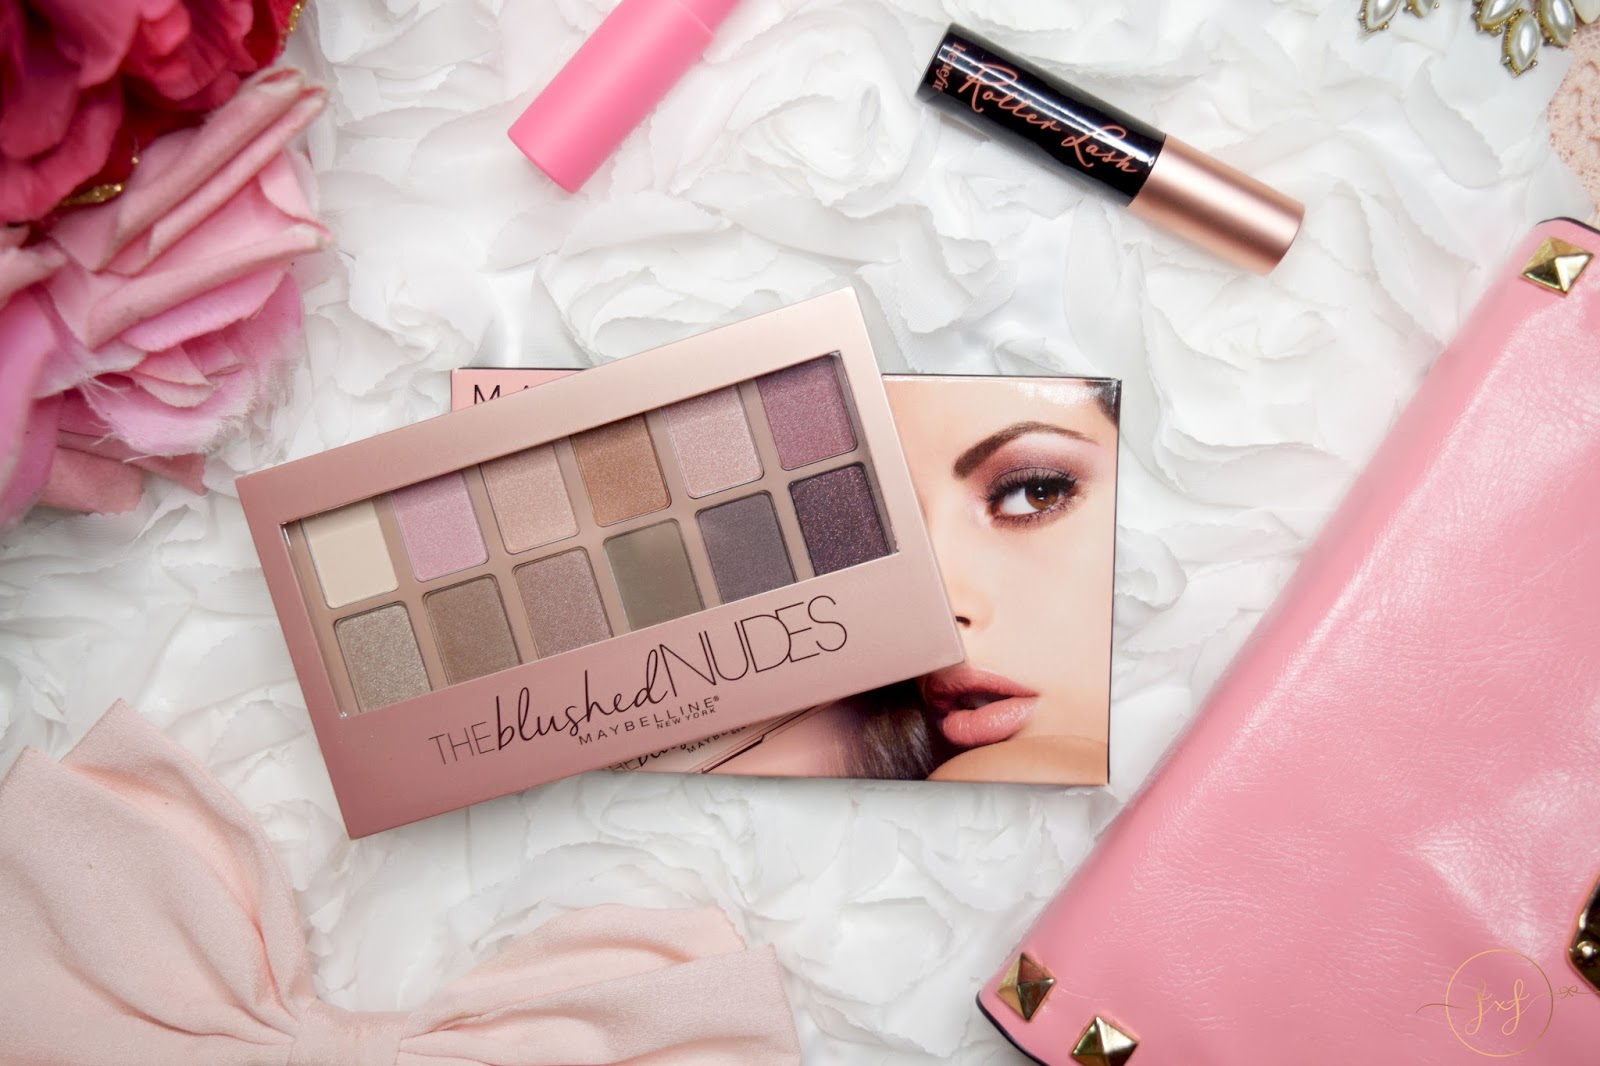 Maybelline Blushed Nudes Palette | Review & Swatches - Fashion Fairytale